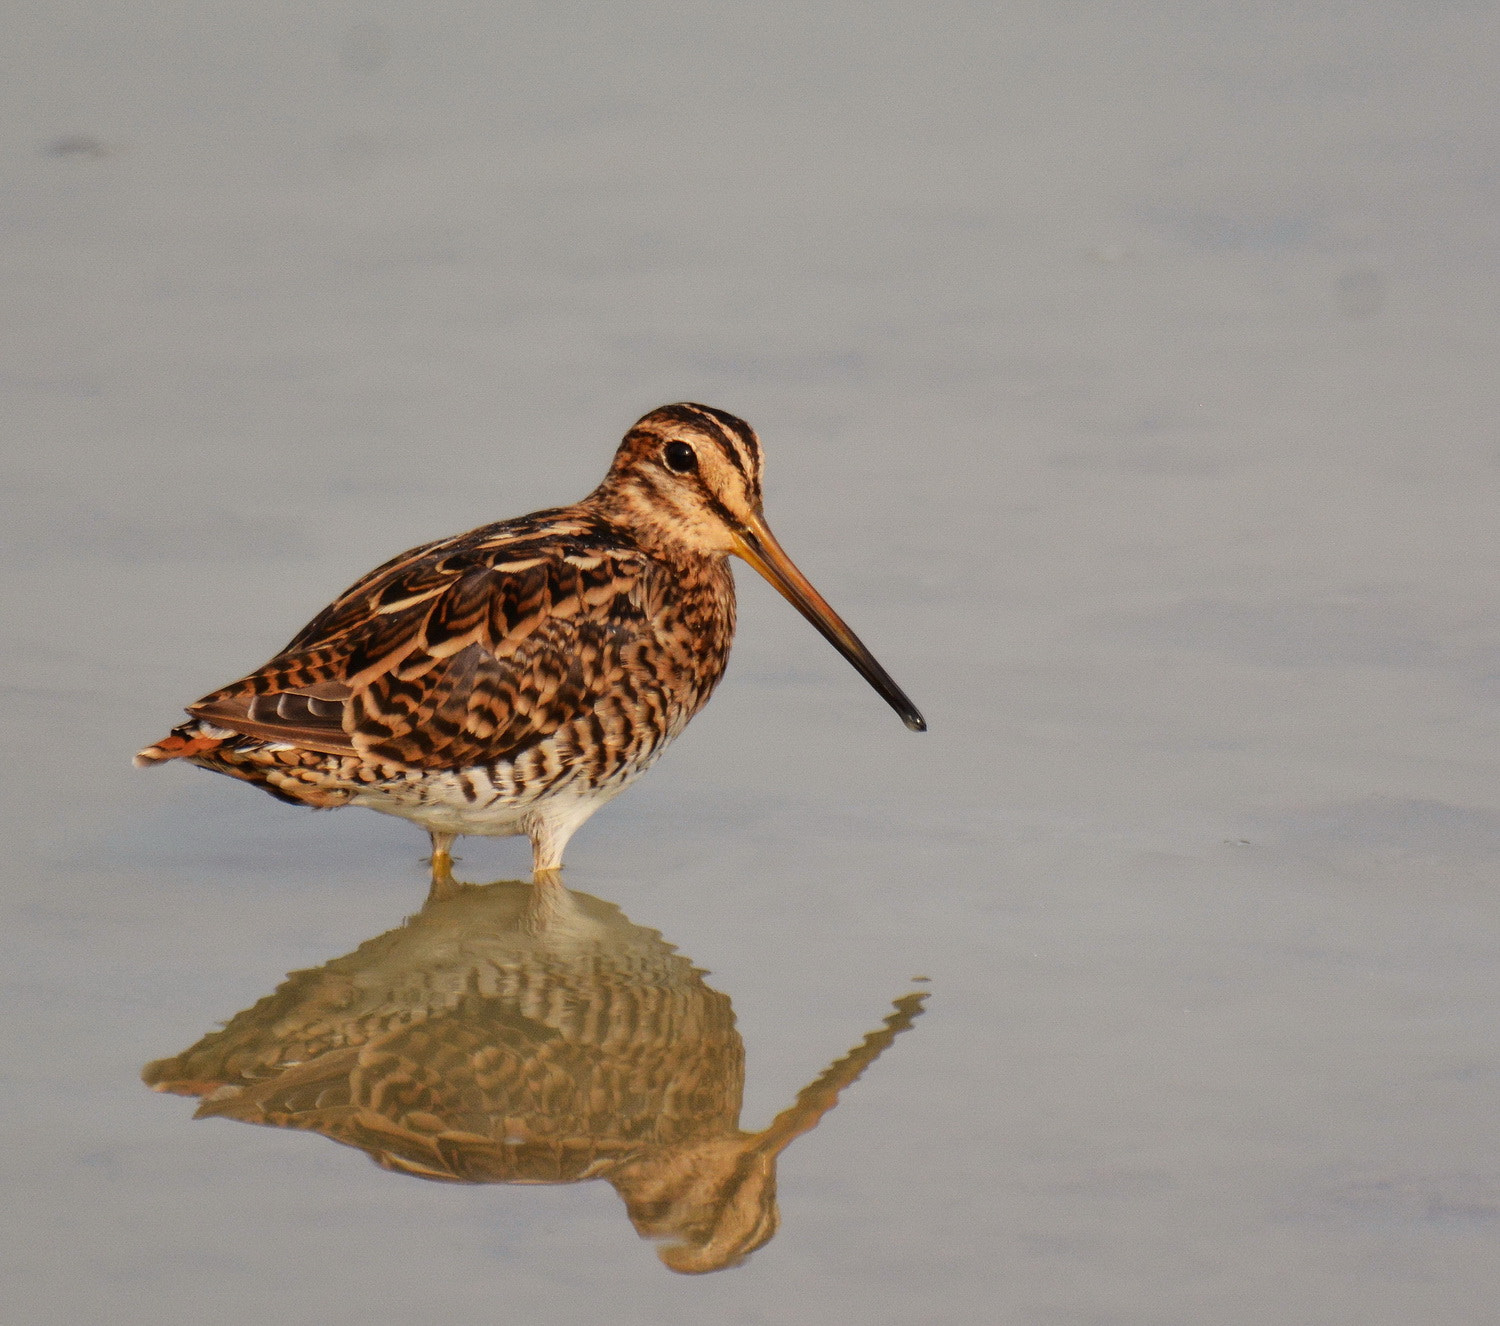 Snipe in View by Amar-Singh HSS / 500px